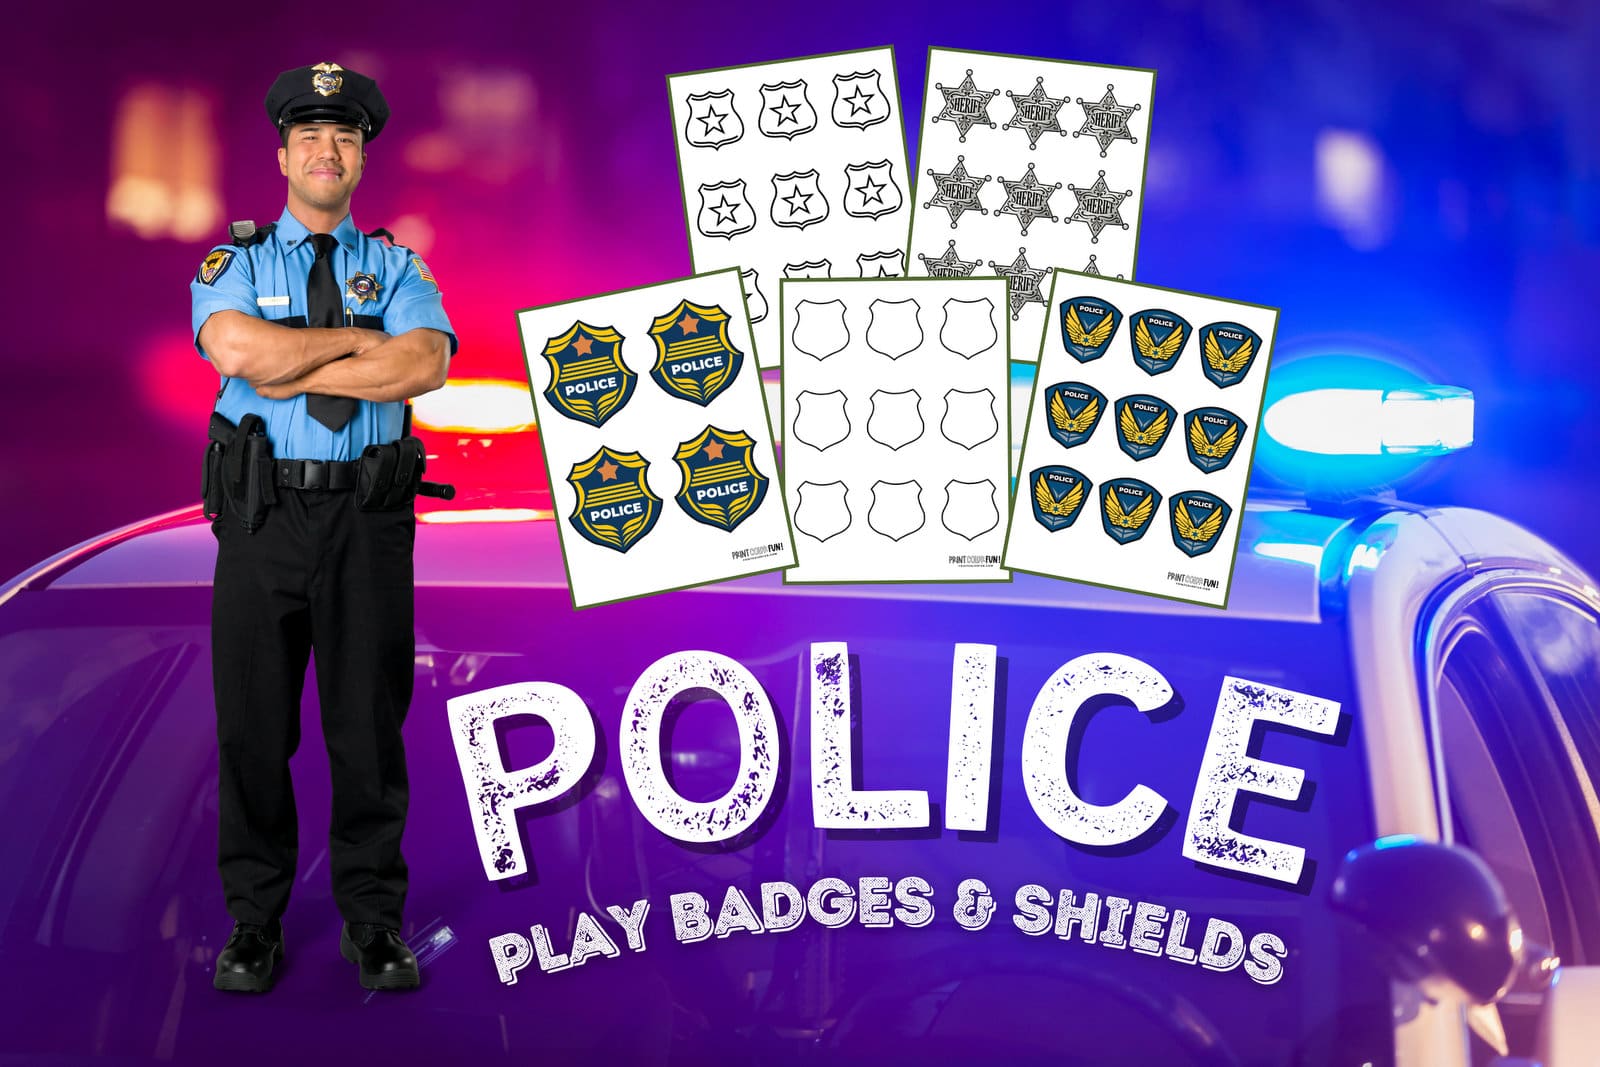 Police play badges and shields for kids and parties from PrintColorFun com